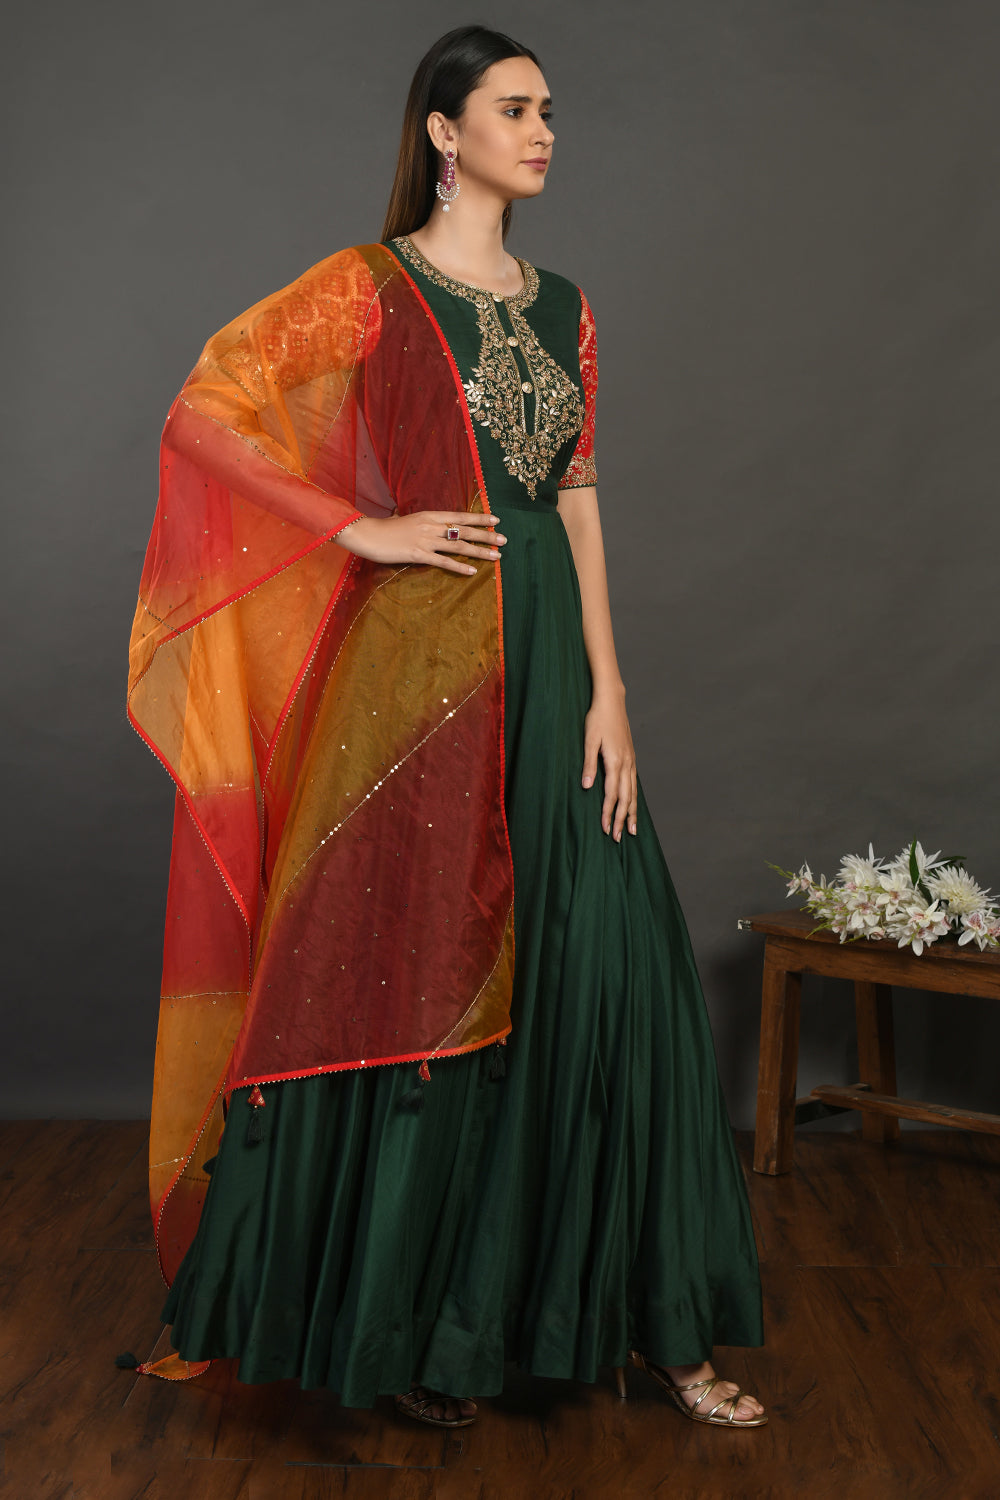 Buy beautiful bottle green muslin Anarkali suit online in USA with red orange dupatta. Dazzle on weddings and special occasions with exquisite Indian designer dresses, sharara suits, Anarkali suits, wedding lehengas from Pure Elegance Indian fashion store in USA.-right